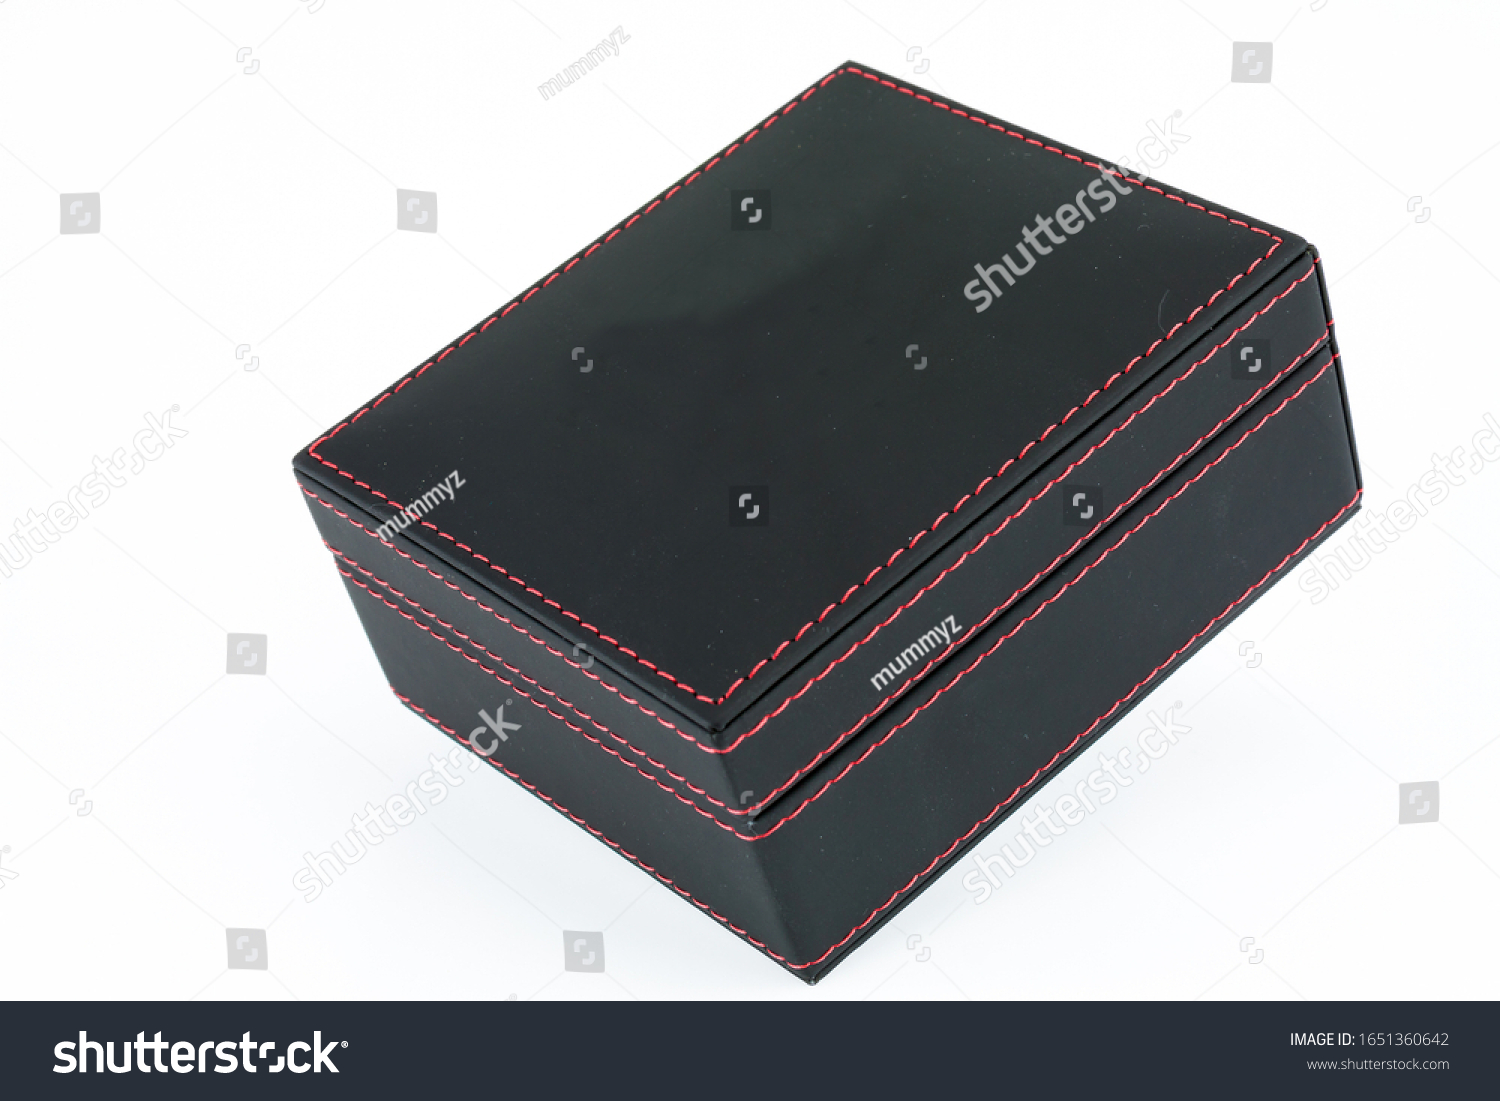 Download Black Leather Box Sewn Bright Red Stock Photo Edit Now 1651360642 PSD Mockup Templates